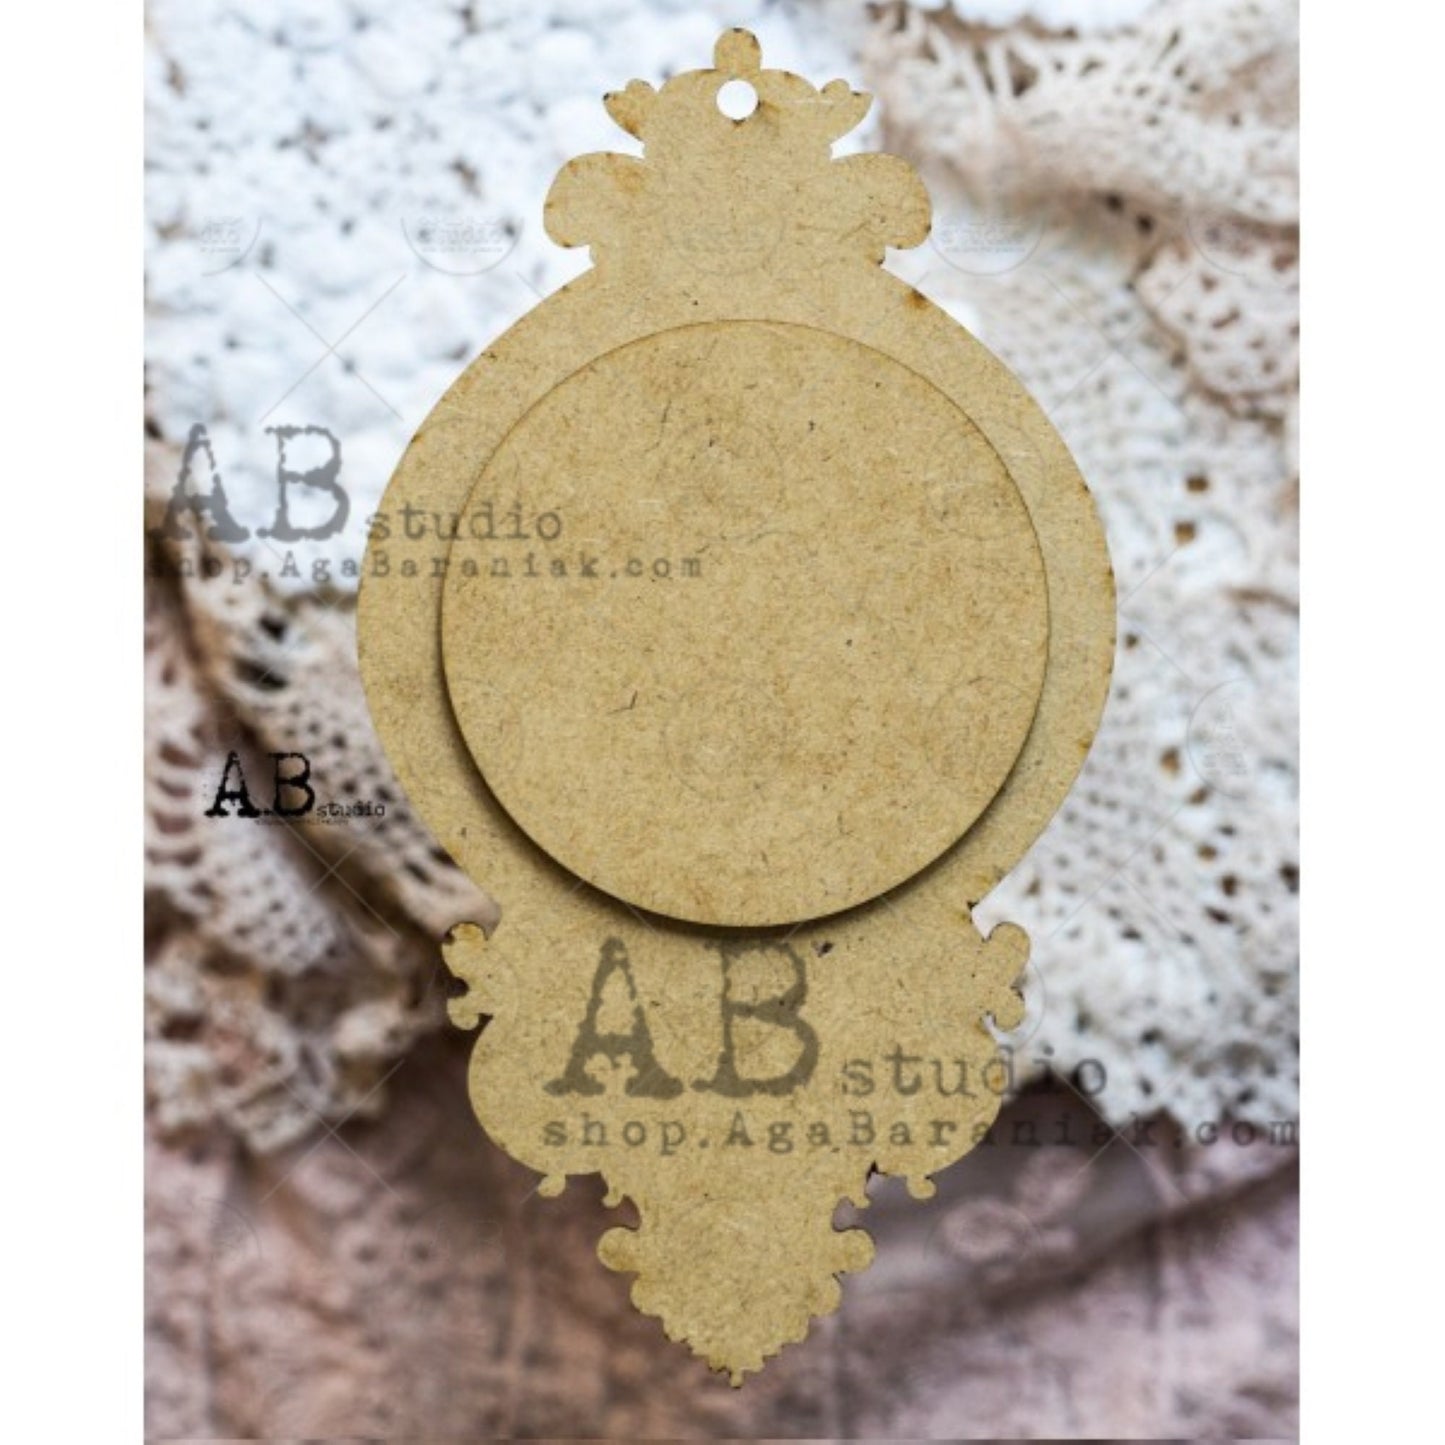 AB Studio Laser Cut HDF  Wood Base with Overlay Ornament Blank 2 pc for Decoupage Crafts, Mixed Media, ID-44, 18cm x 10cm, 7 x 4